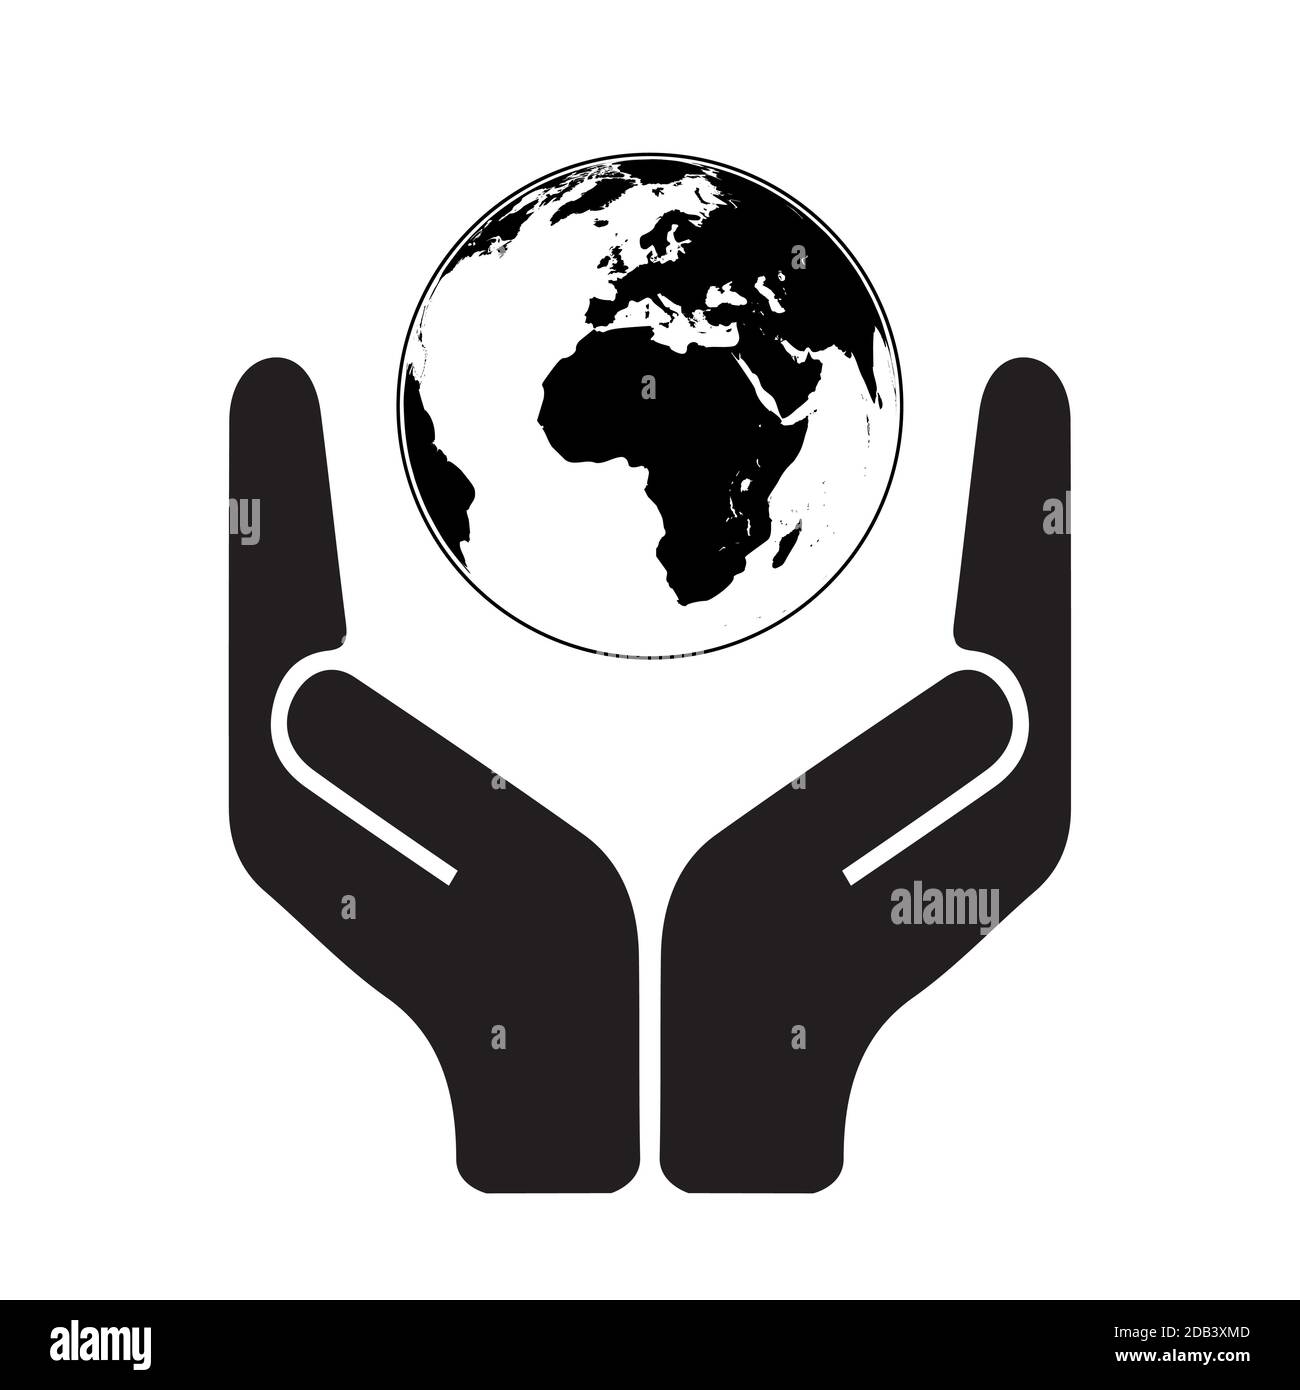 Handle With Care Symbol Holding Earth Symbol Of Saving Our Environment And Planet Minimalist Vector Illustration Stock Vector Image Art Alamy